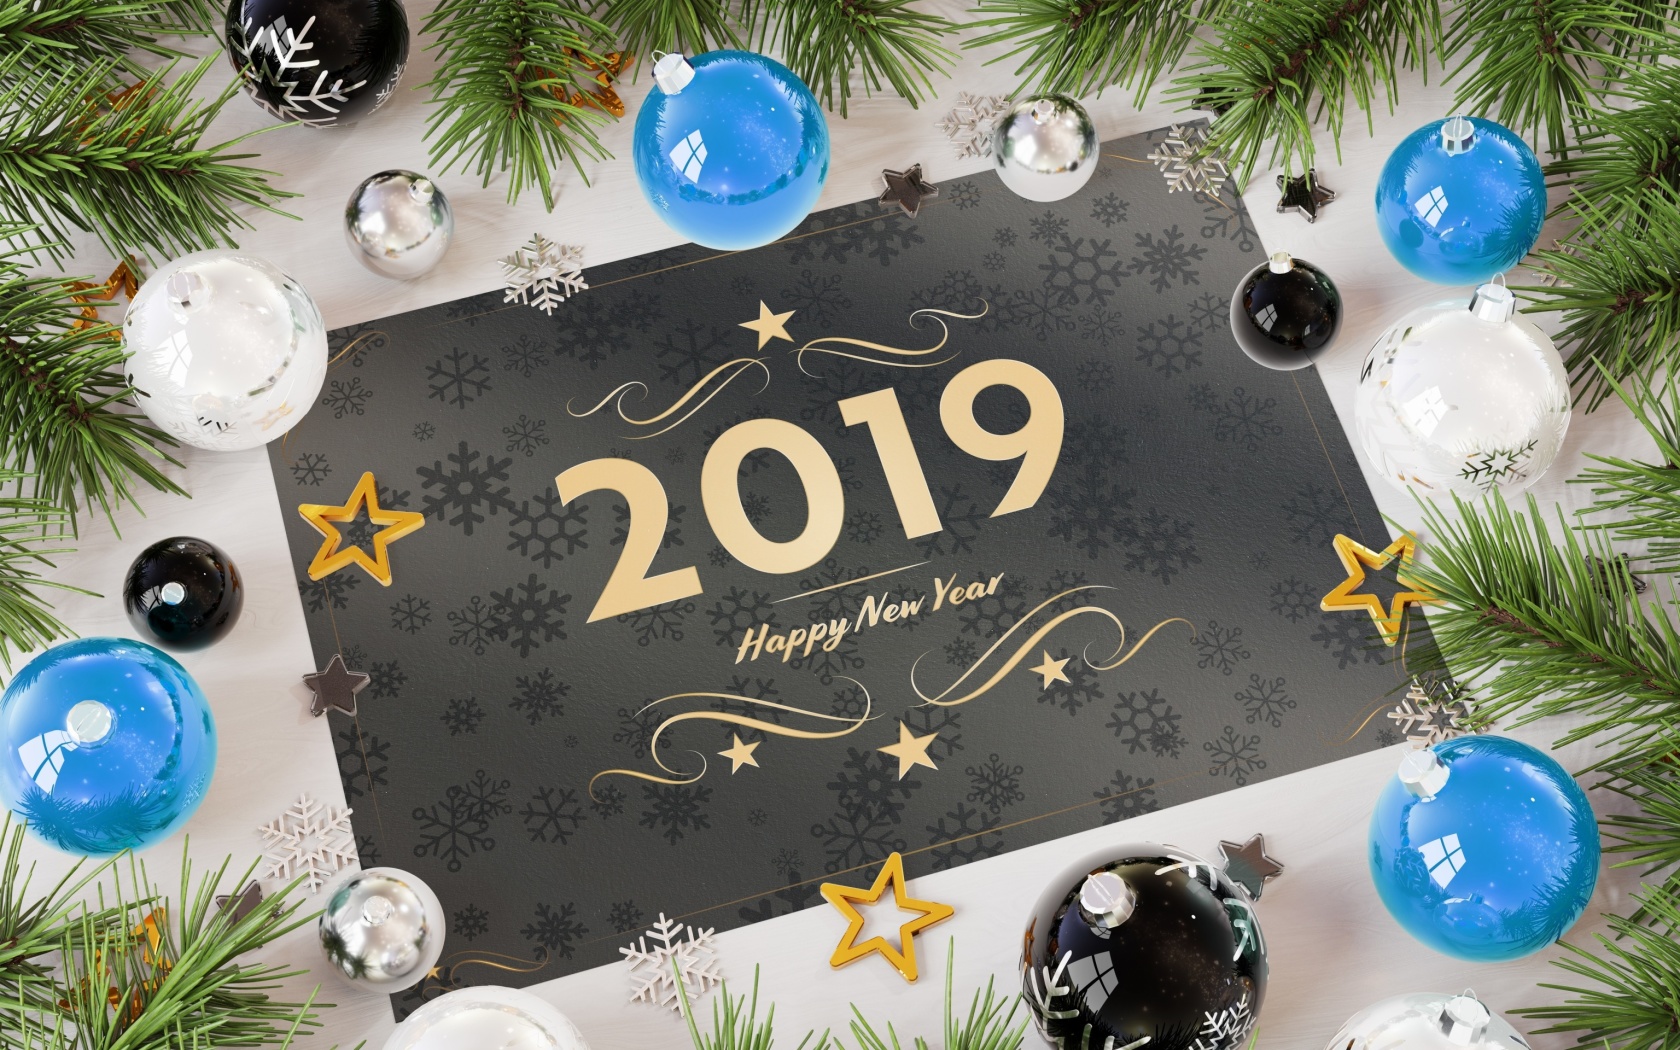 2019 Happy New Year Message wallpaper 1680x1050